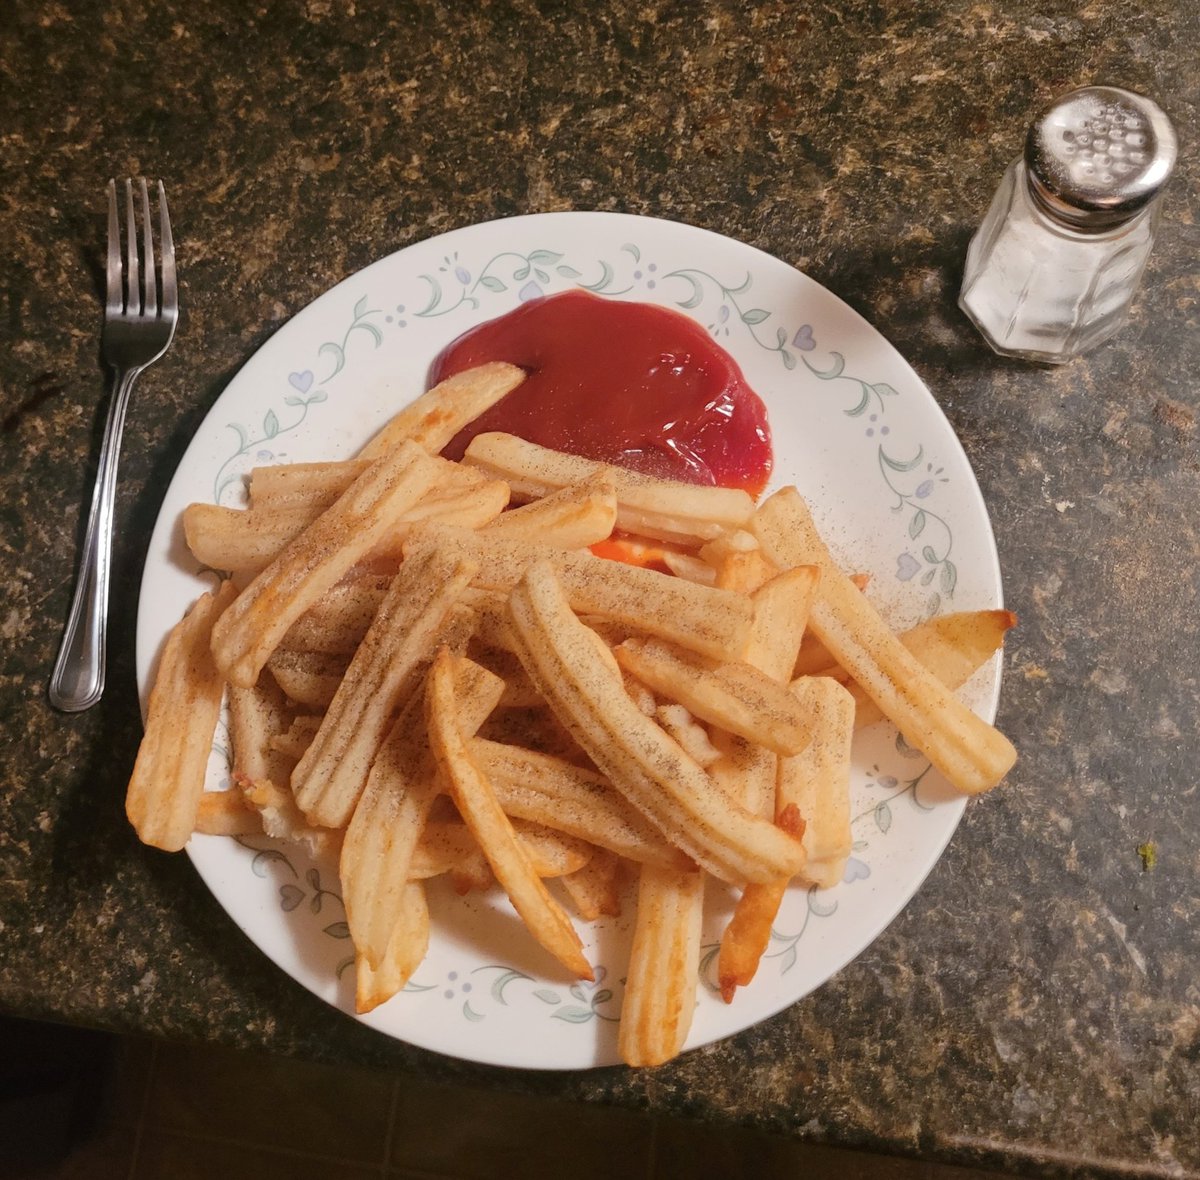 Tonight I just had a hankering for some convection-cooked McCain 'Superfries' and that's what happened. Dinner, right there!